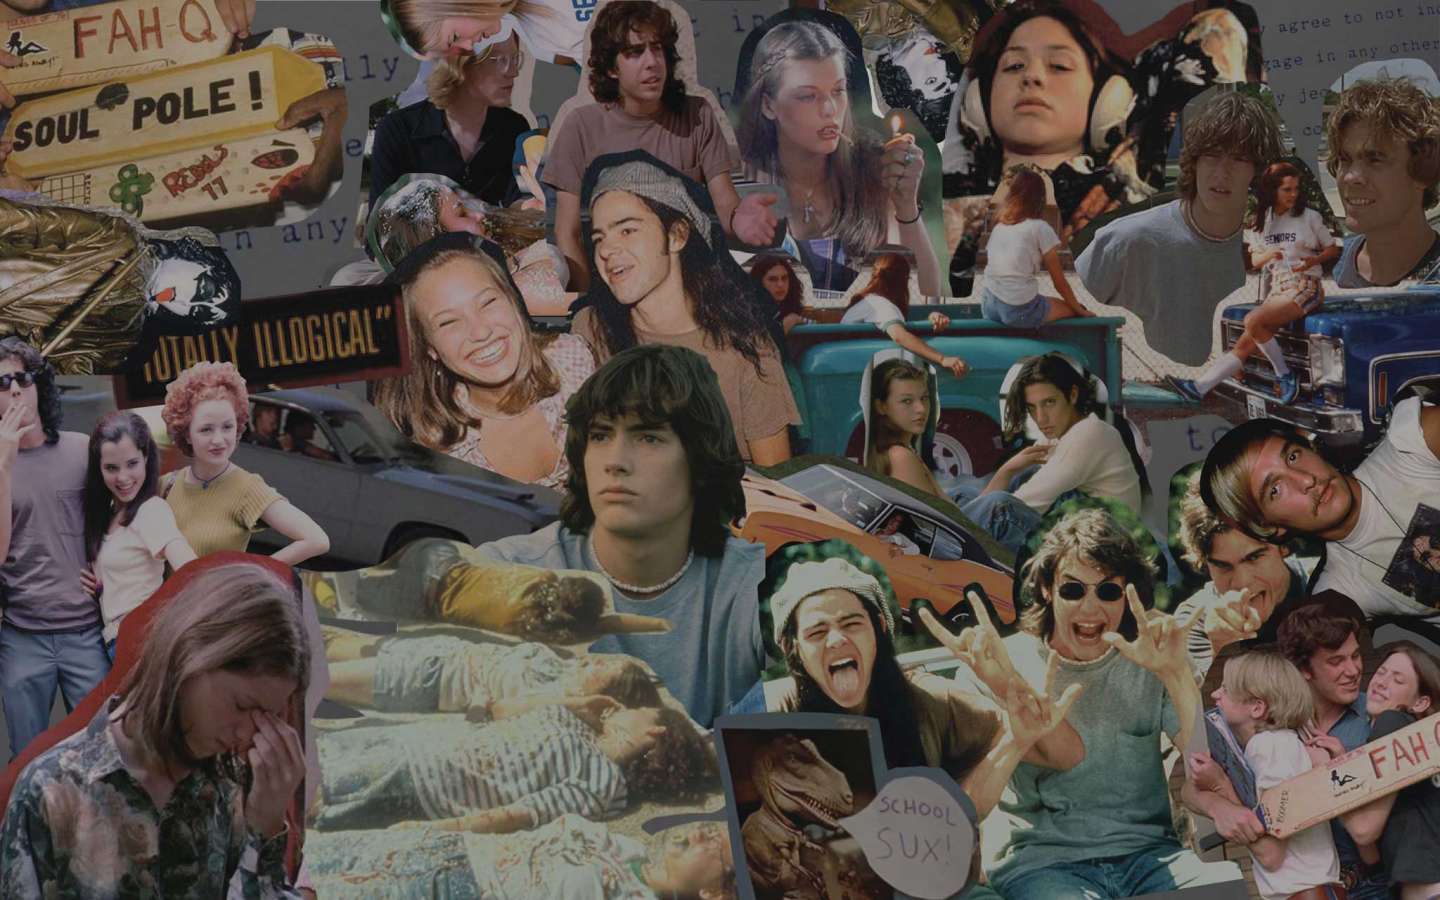 Everything about Dazed and Confused